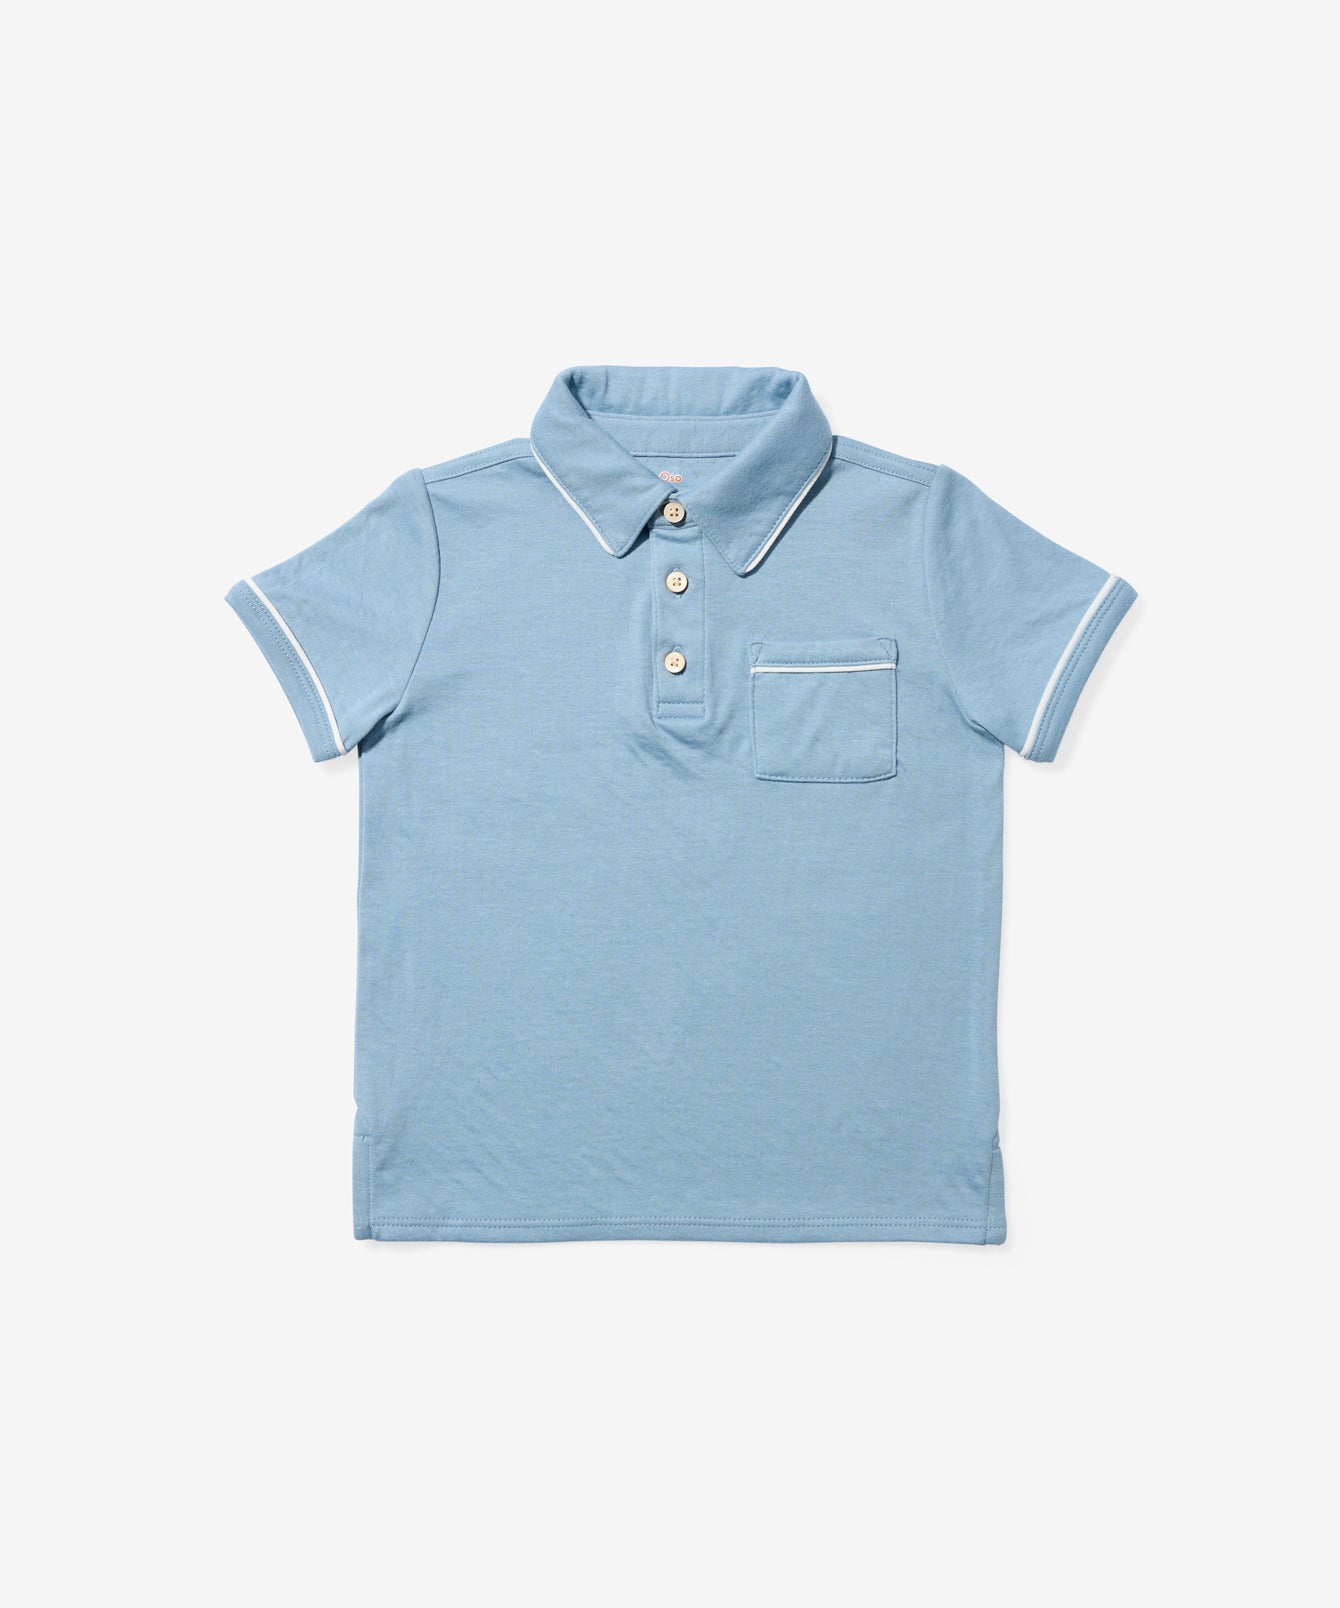 The Perfect Polo Shirt for Boy or Girls | Oso and Me – Oso & Me